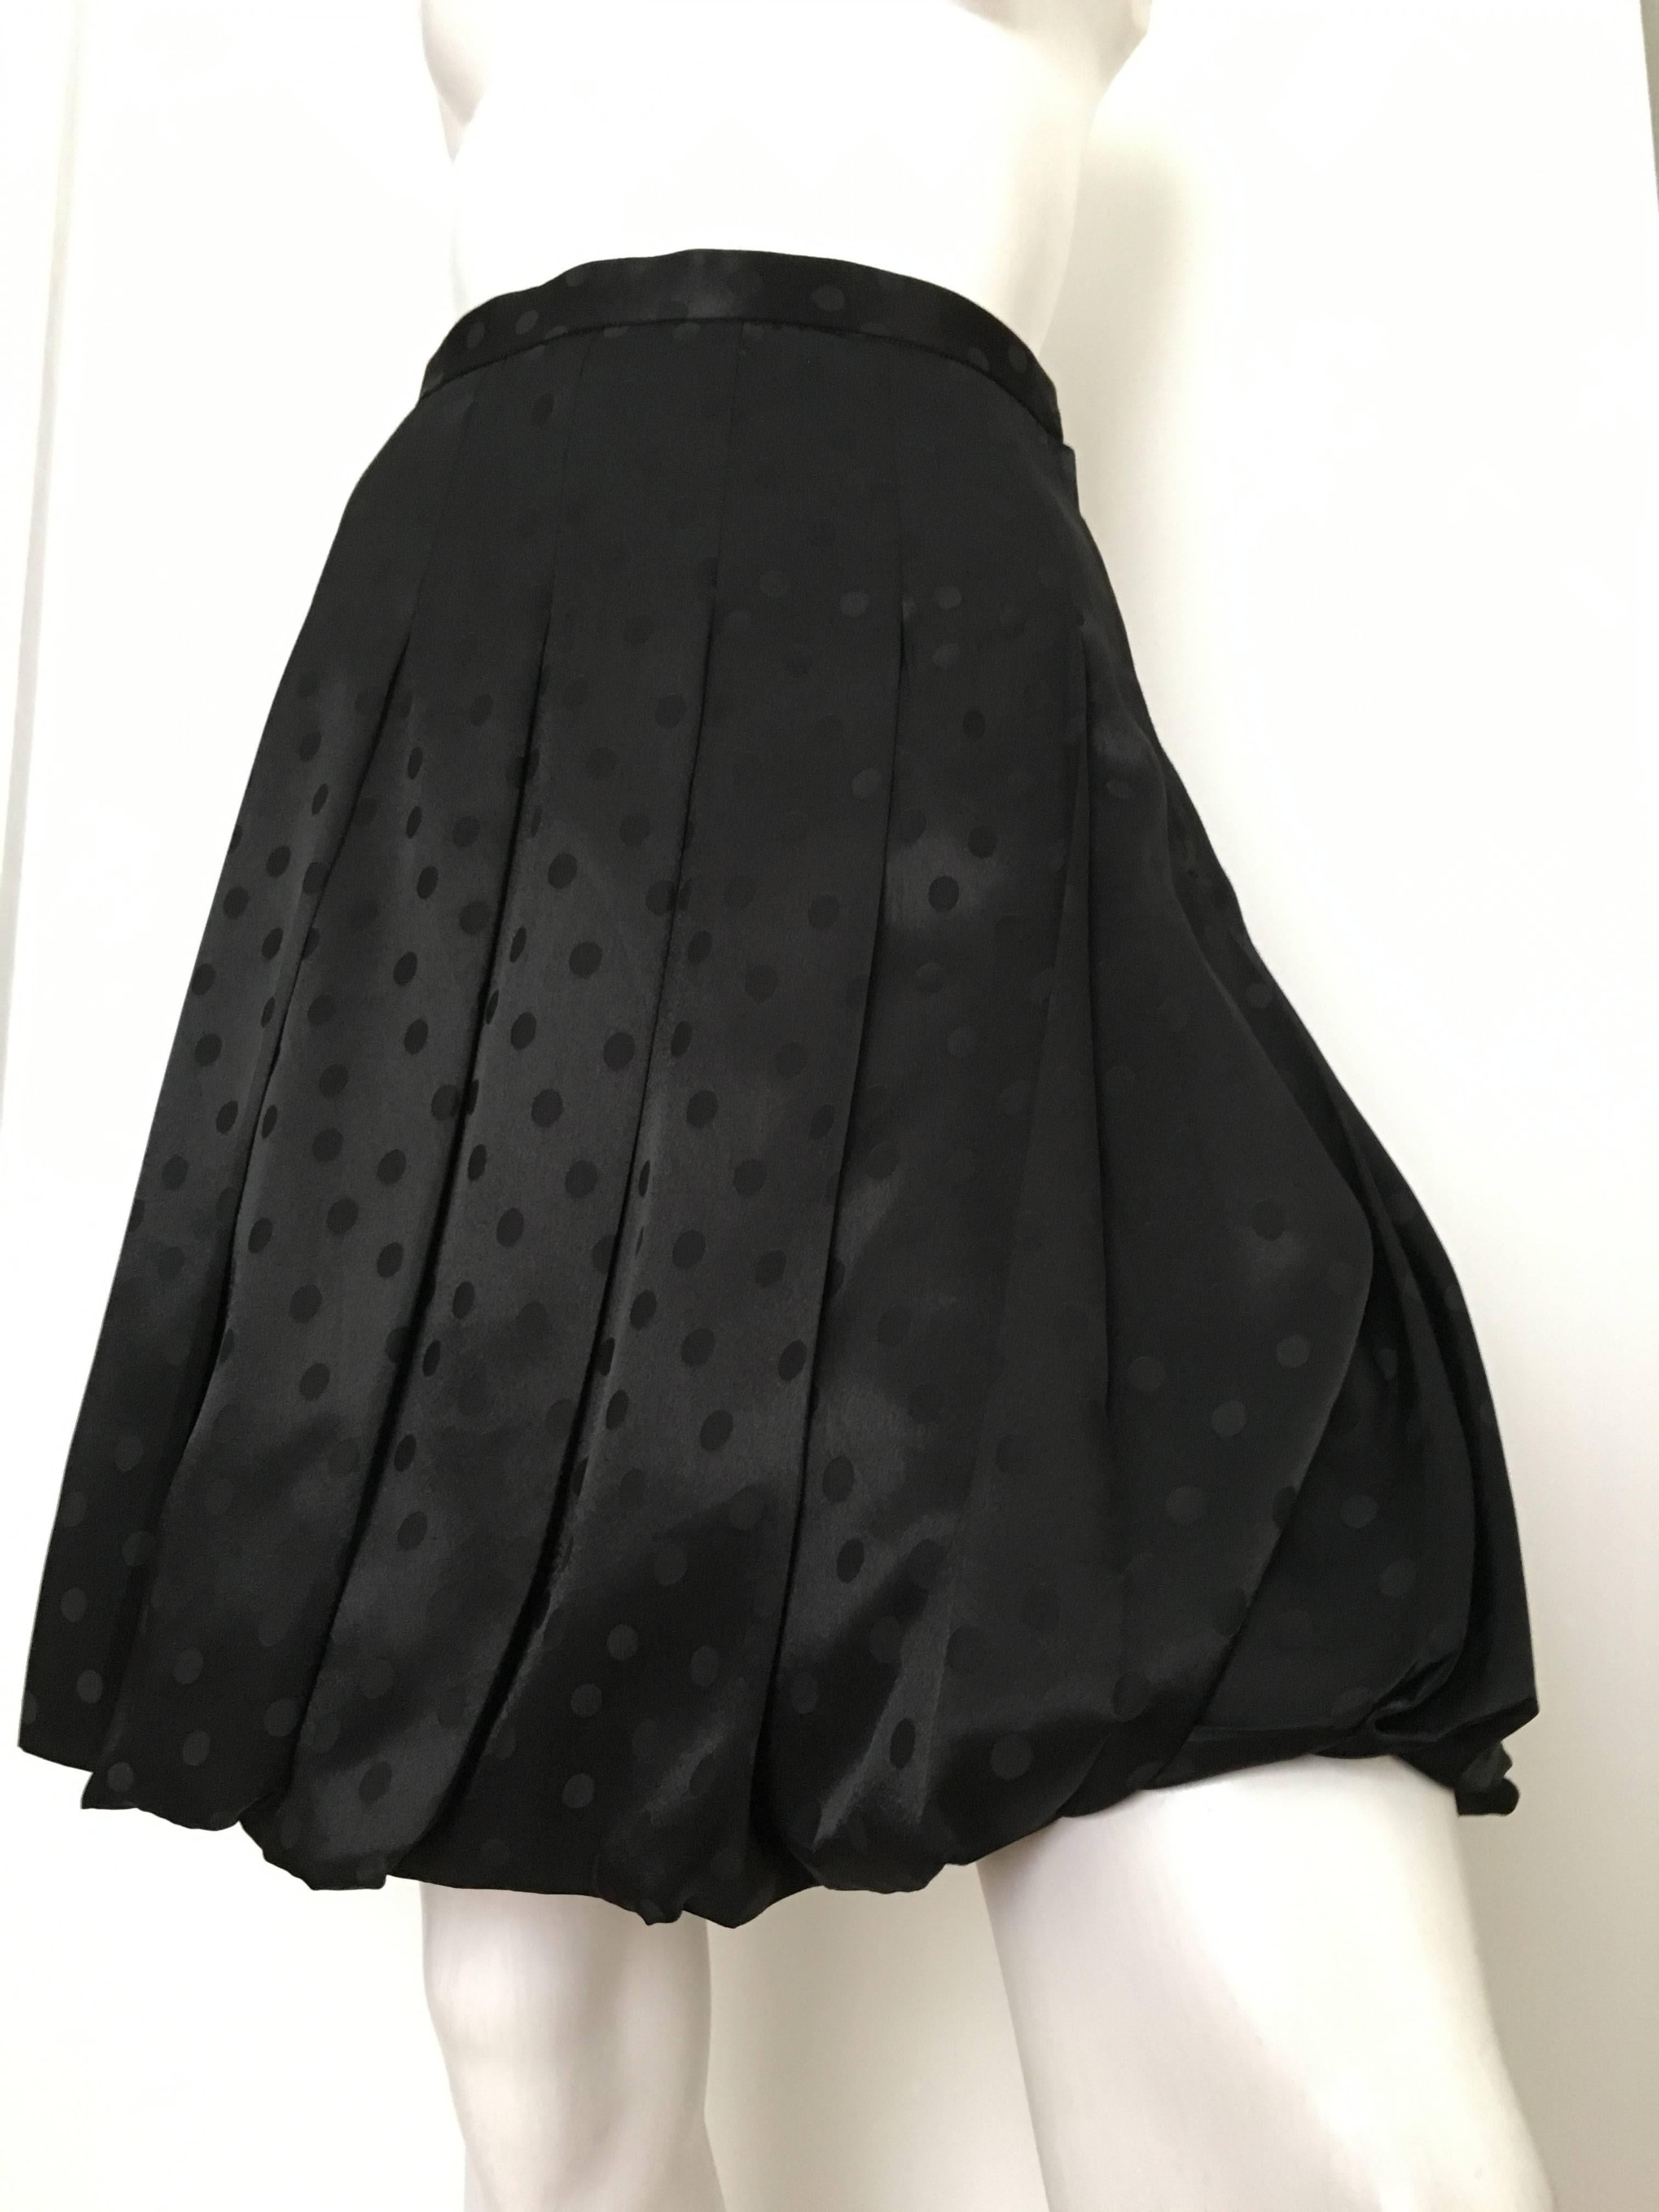 Comme des Garçons by Junya Watanabe black jacquard polka dot pleated bubble skirt is a size small and fits like an USA size 6.  Ladies please grab your tape measure so you can properly measure your waist & hips to make certain this piece will fit